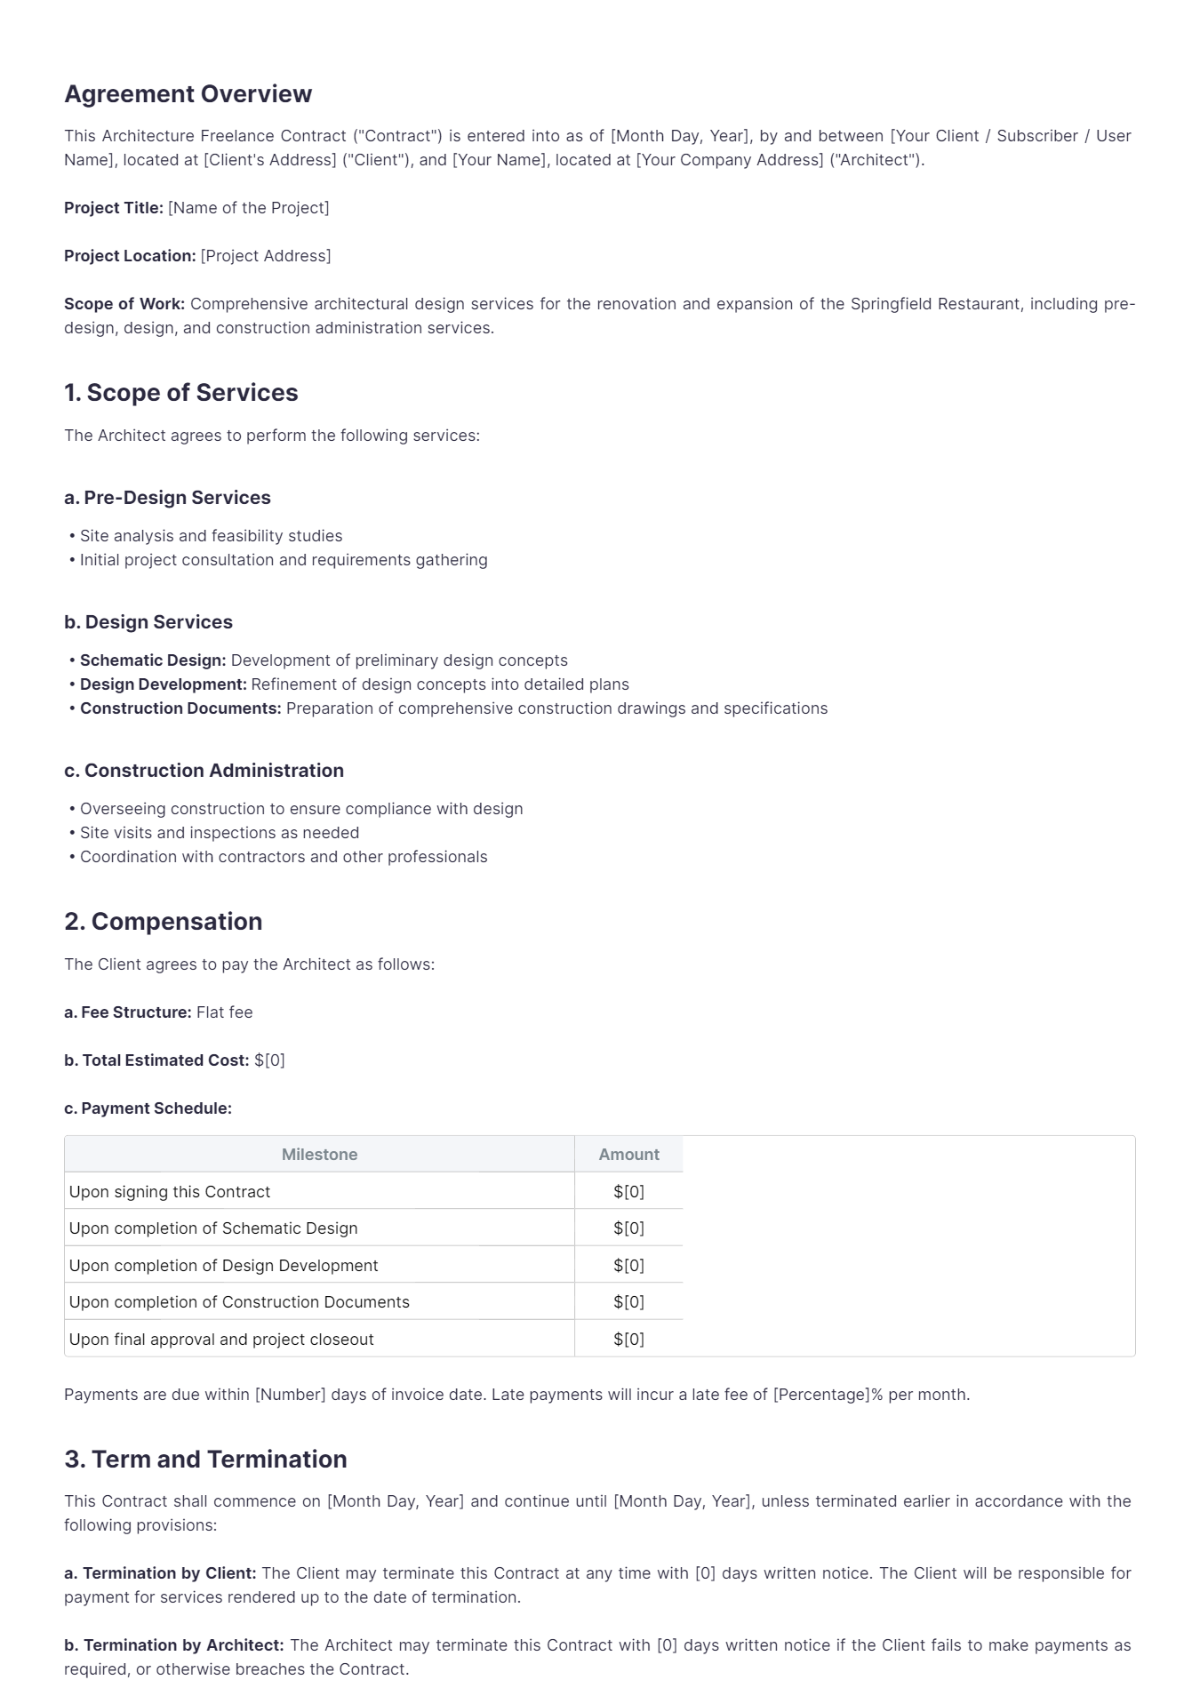 Architecture Freelance Architecture Contract Template